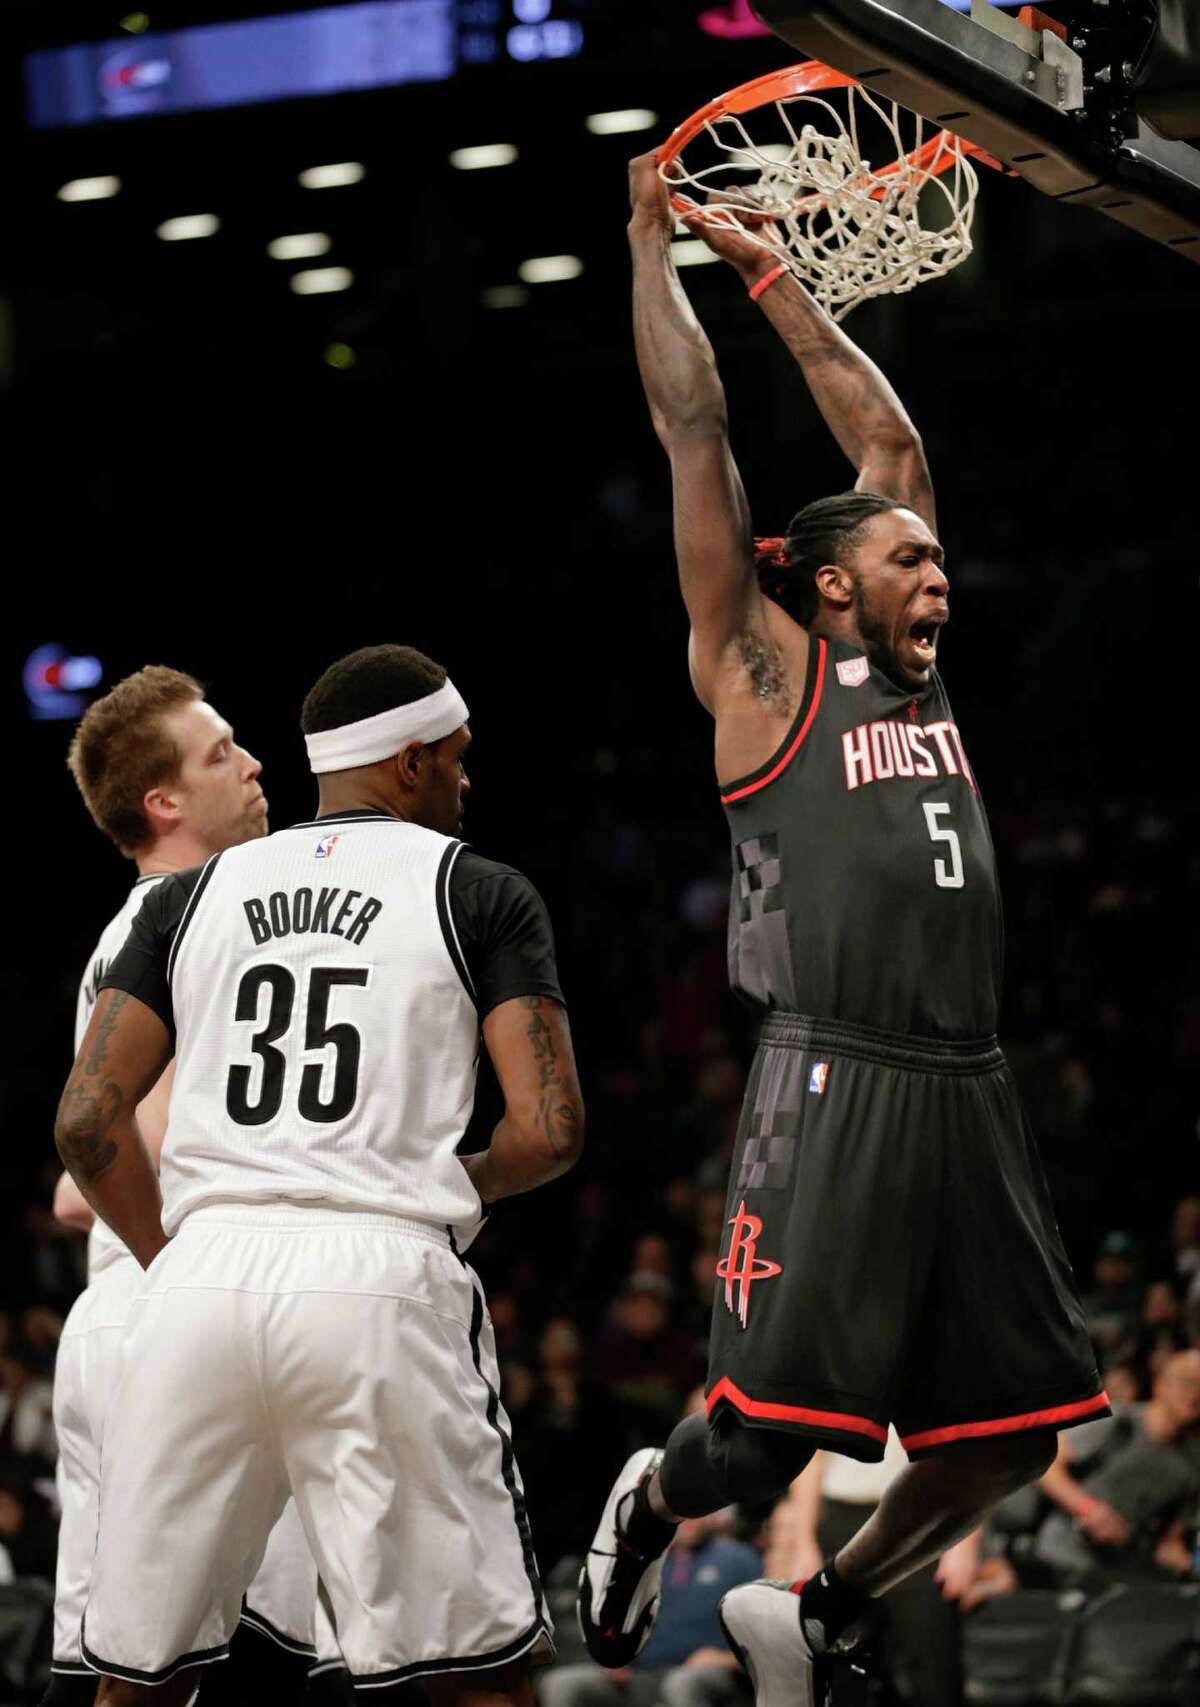 The Rockets' Montrezl Harrell, right, dunks on the Nets' Trevor Booker during the first half for two of his 16 points in the win Sunday at Barclays Center.